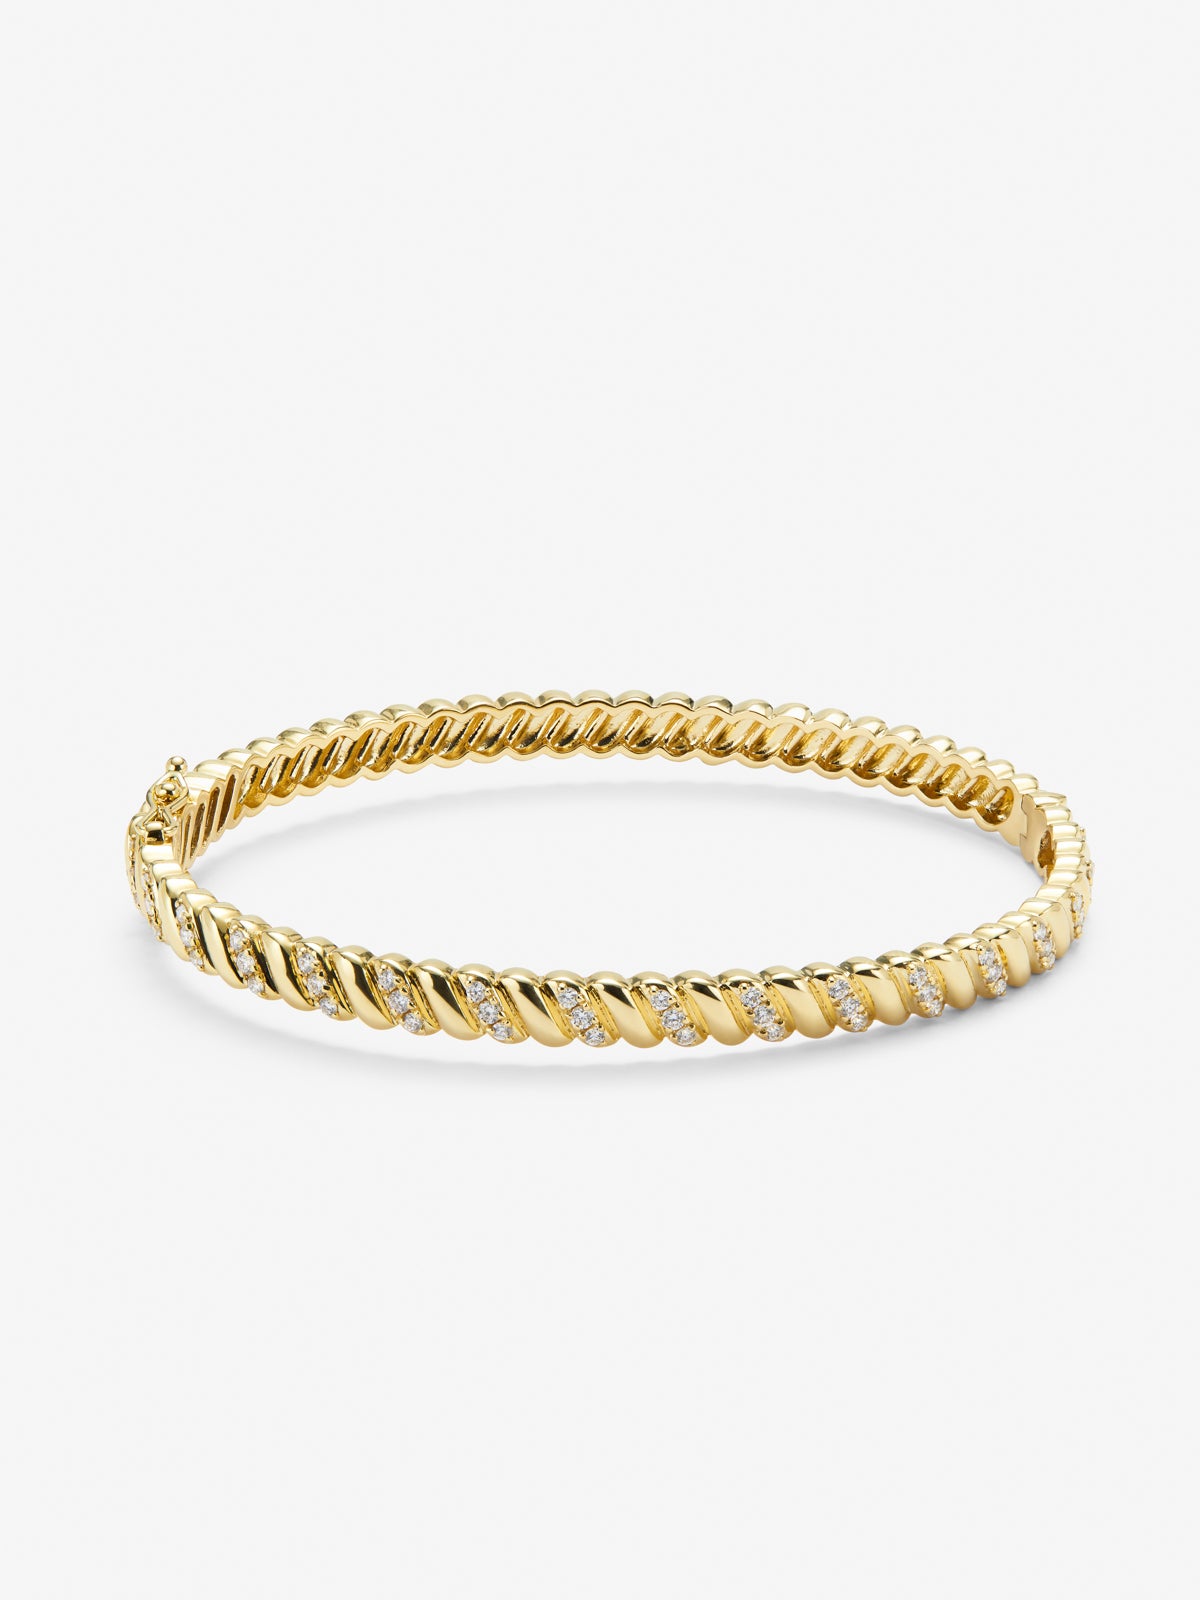 Rigid yellow gold bracelet of 18k with white diamonds in 0.58 cts